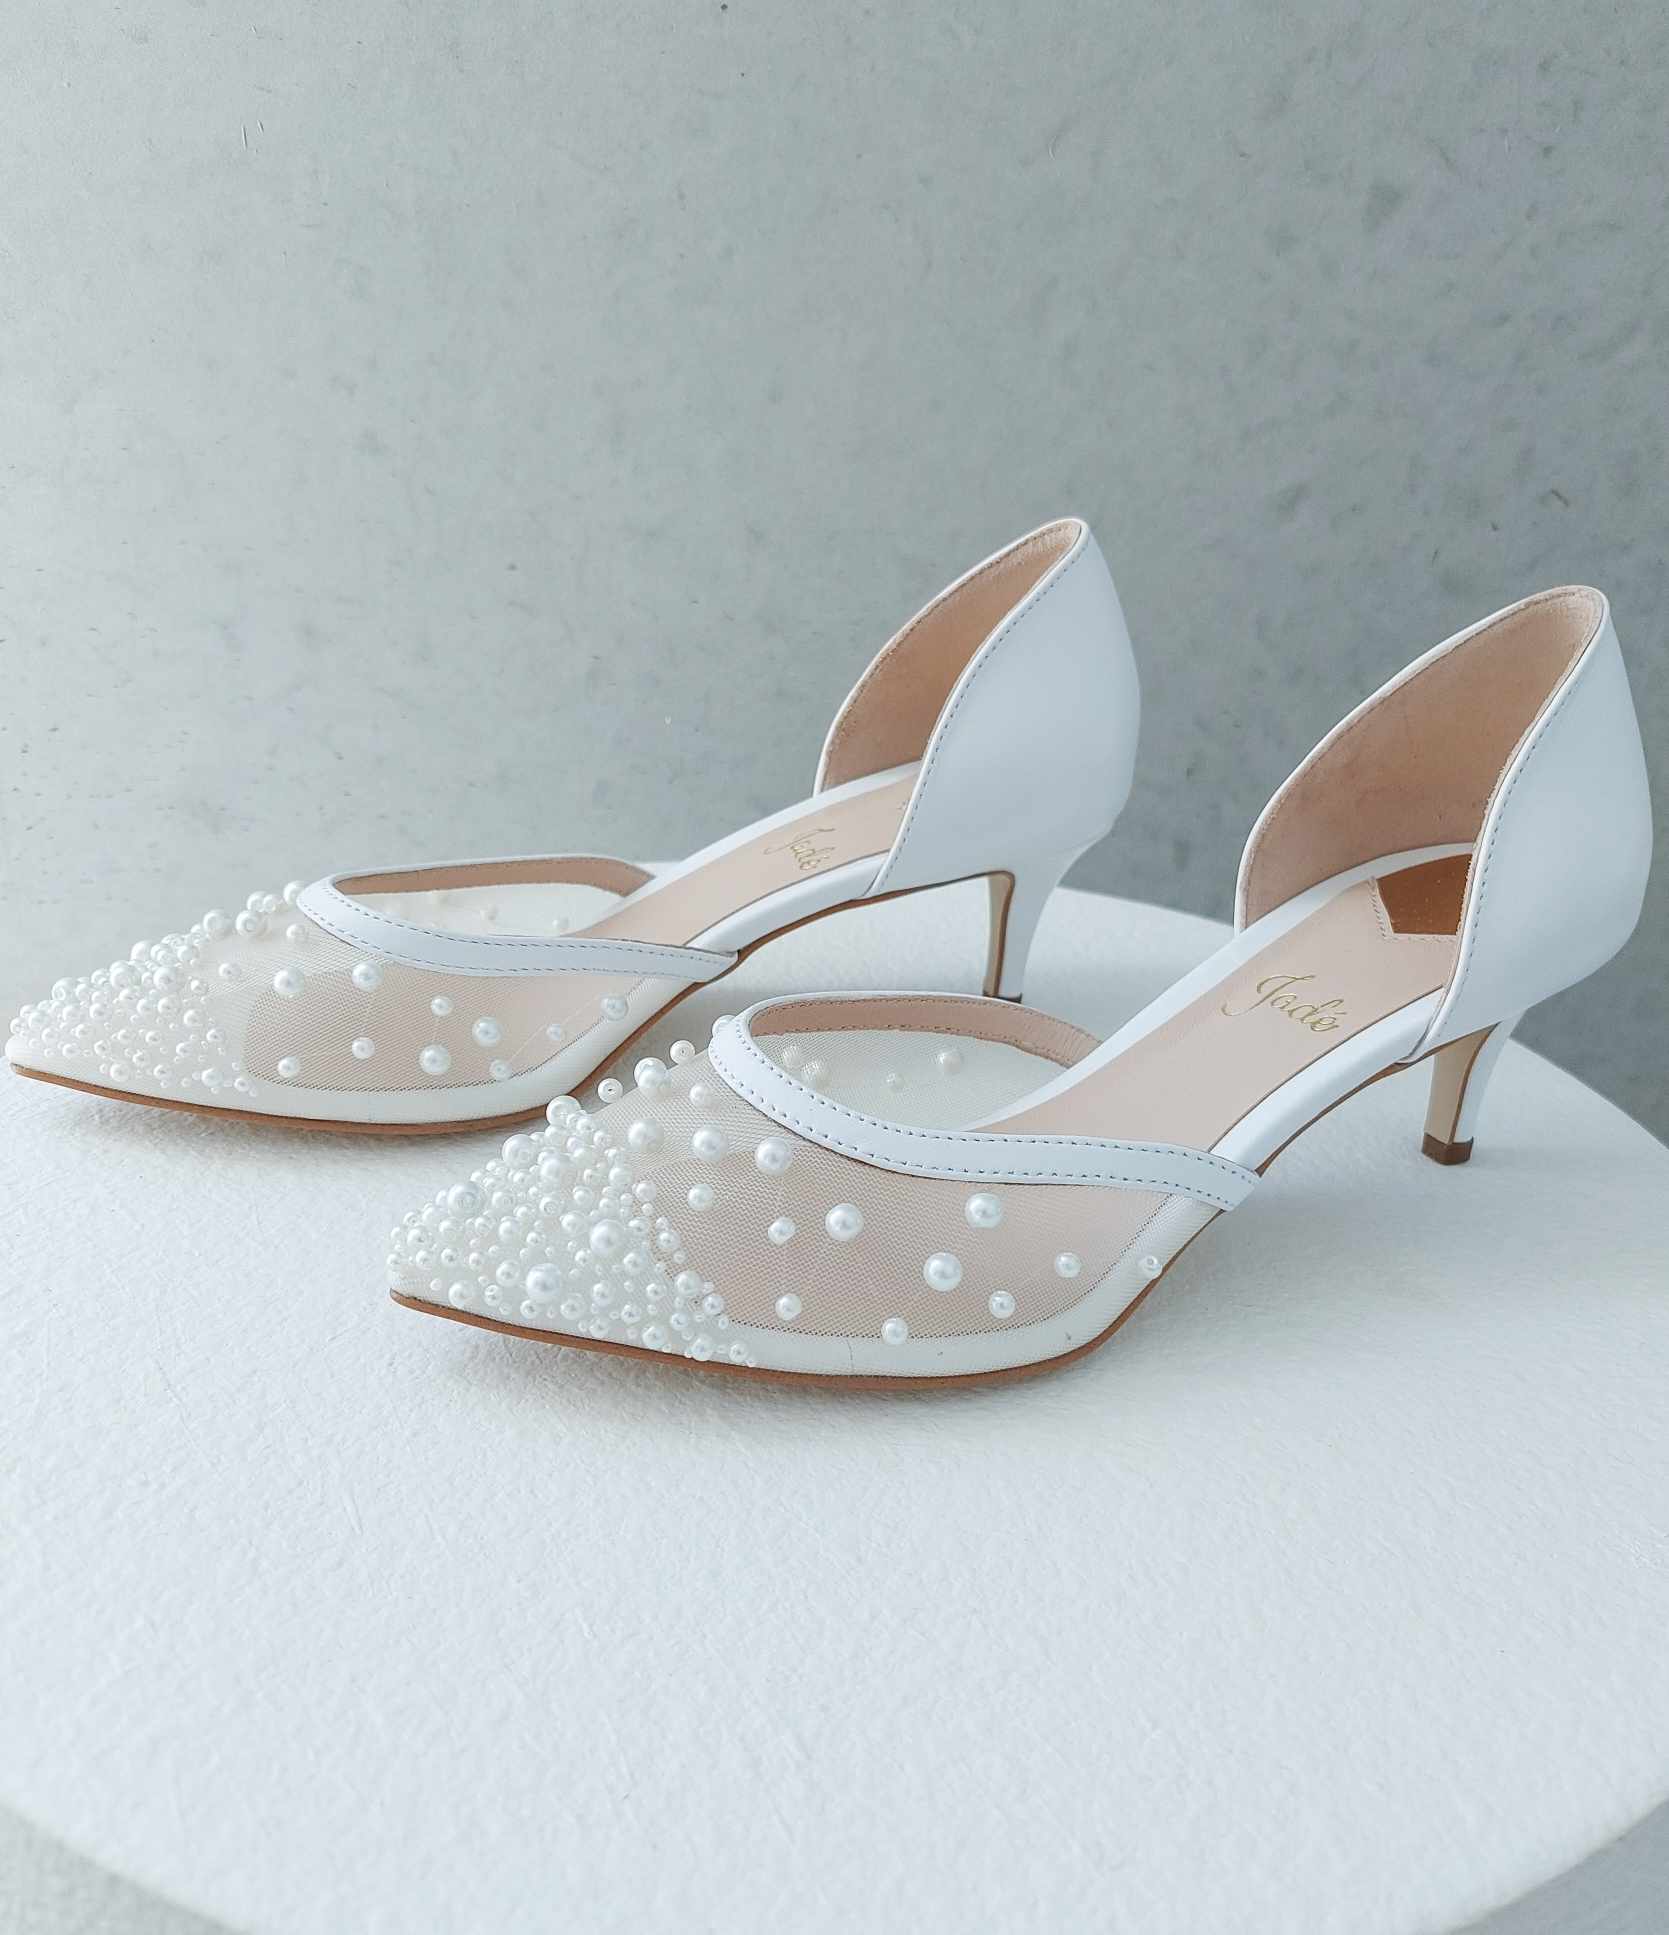 Buy Wedding Shoes Bridal Shoes High Heel / Low Heels Satin Wedding Crystal Shoes  Wedding Lace Shoes, Bride Shoes Online in India - Etsy